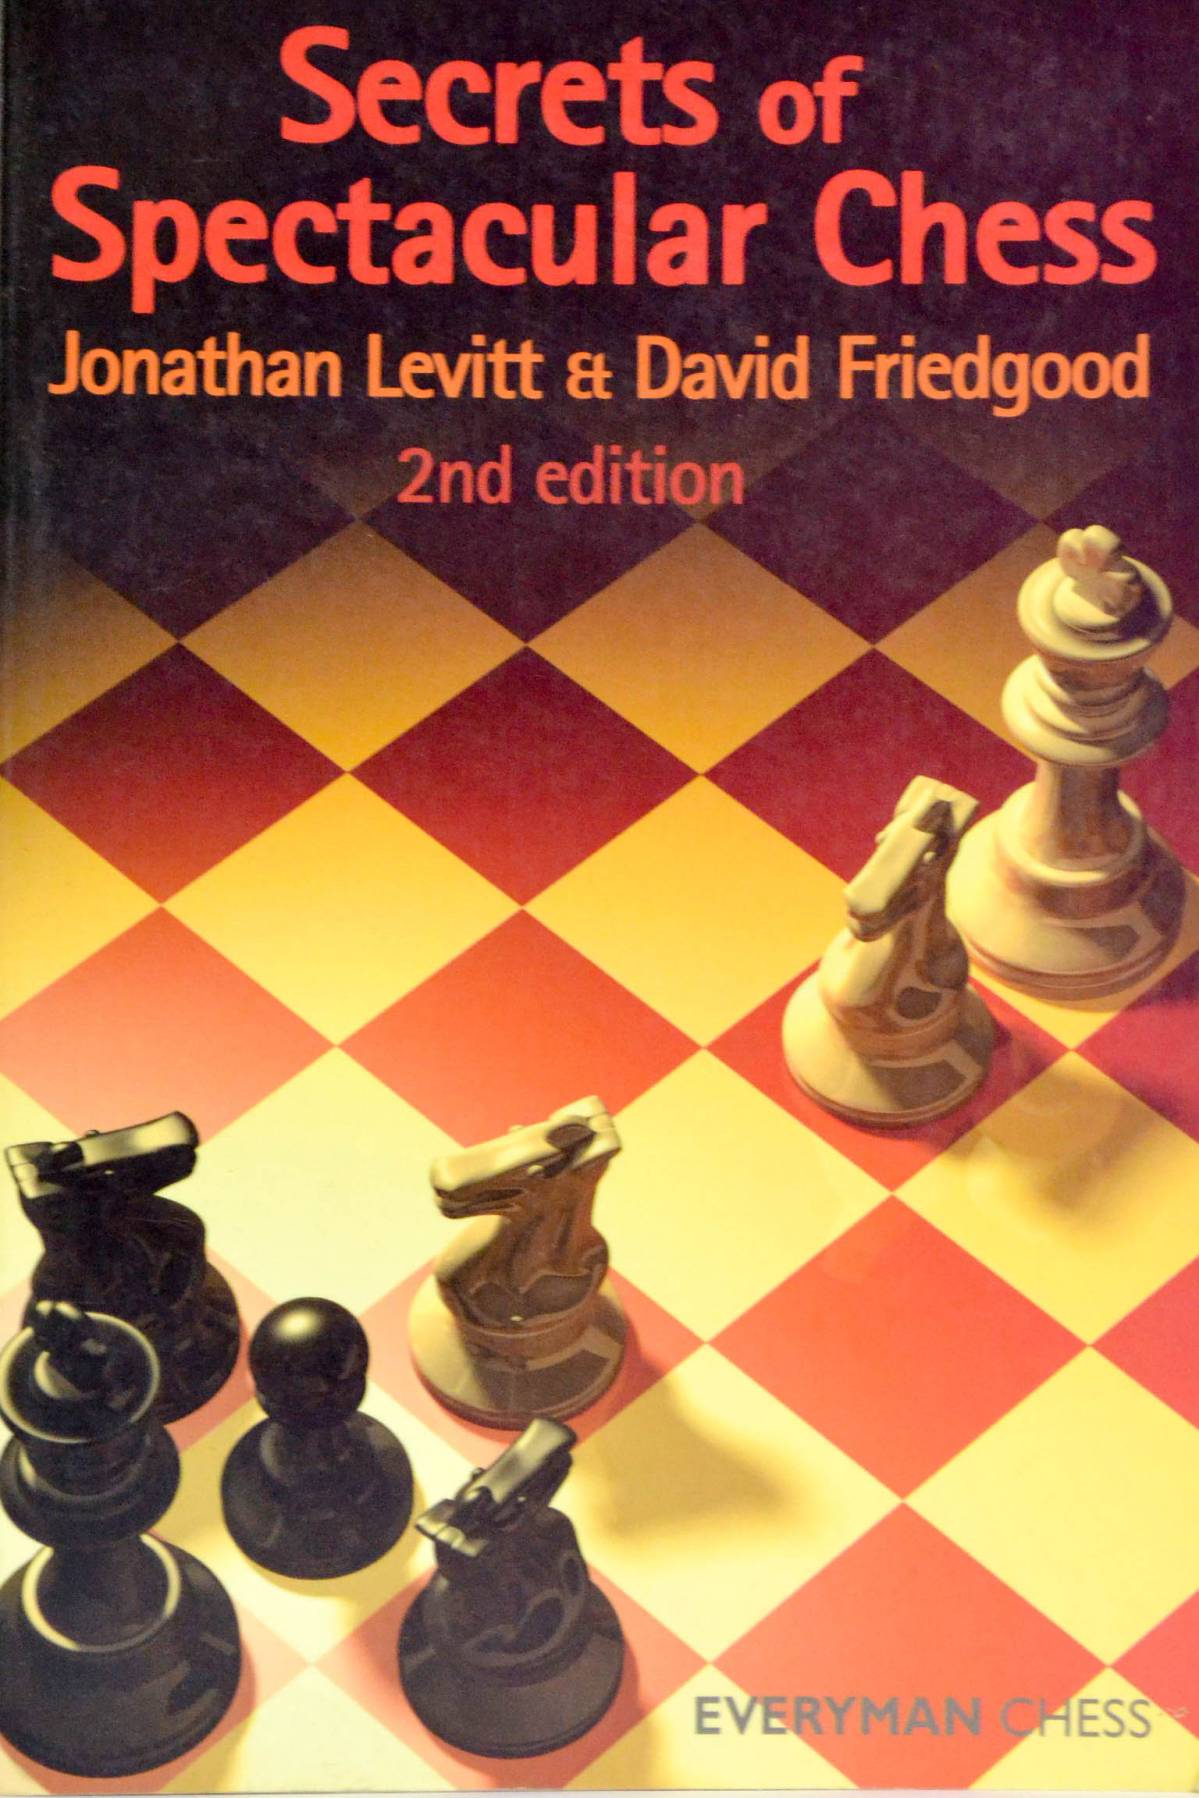 book VHDL 2008: